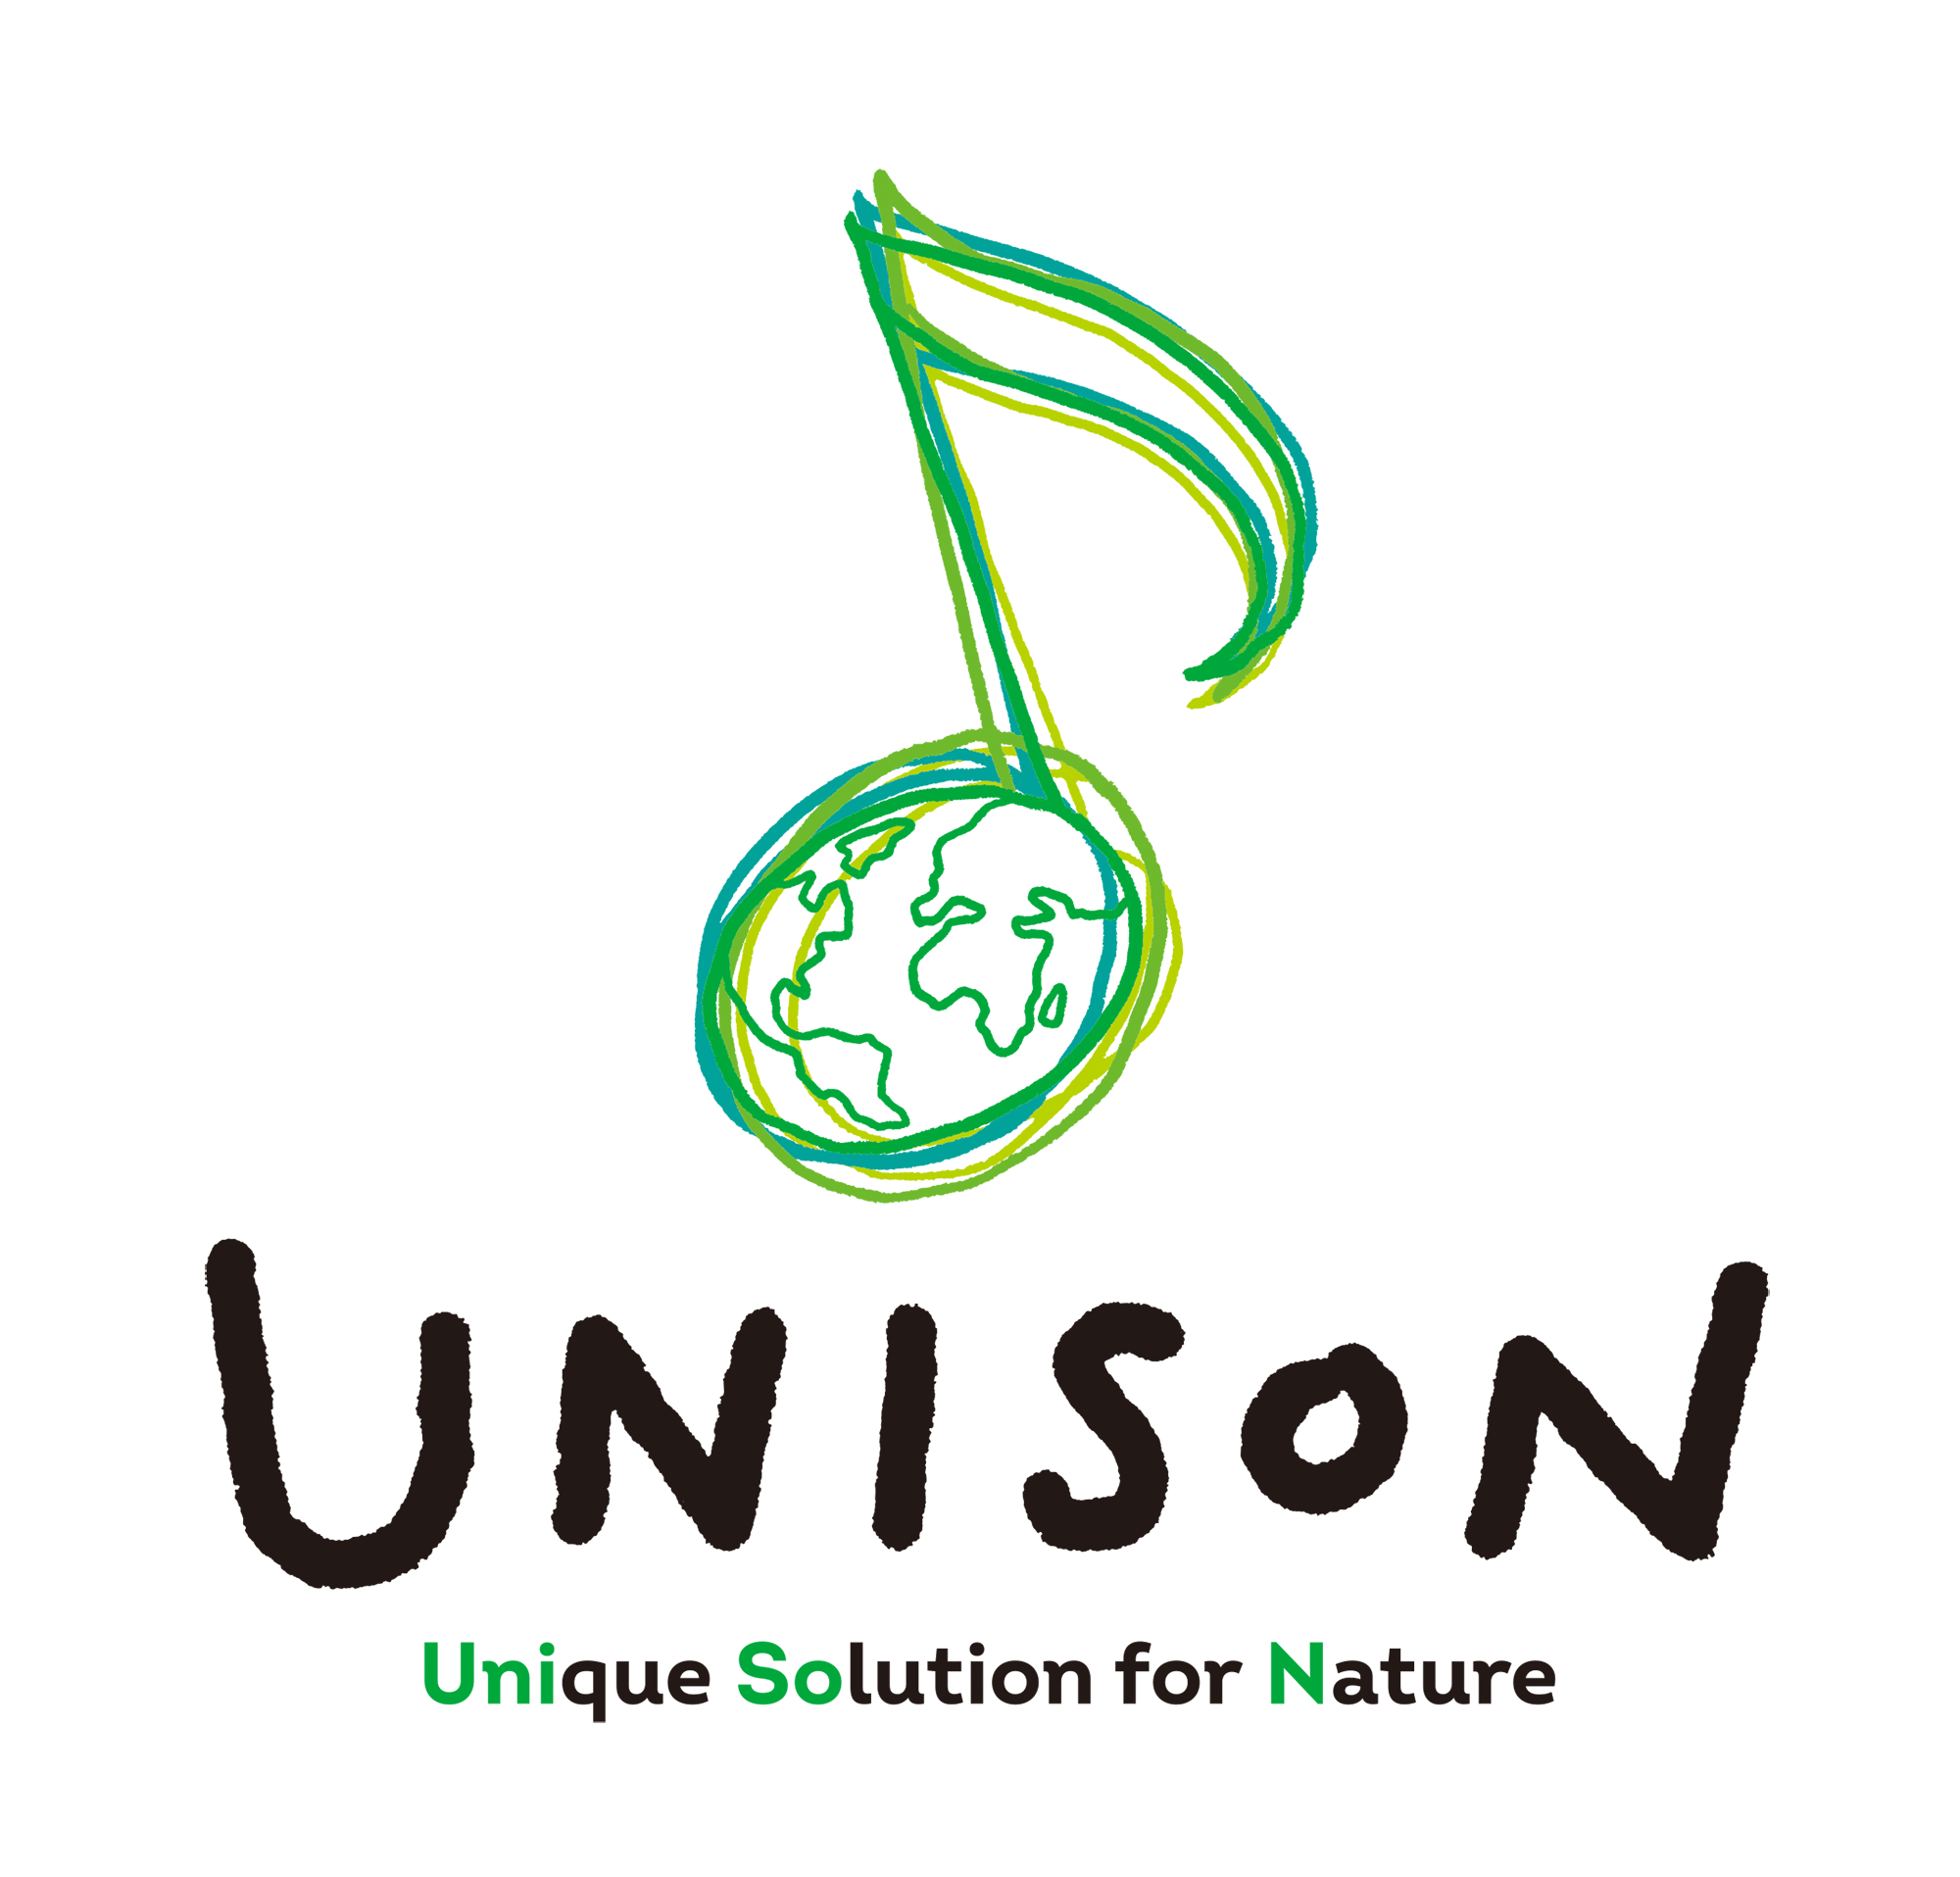 Launch of New Waste to Resources Biorefinery Business Brand “UNISON <sup>TM</sup>”